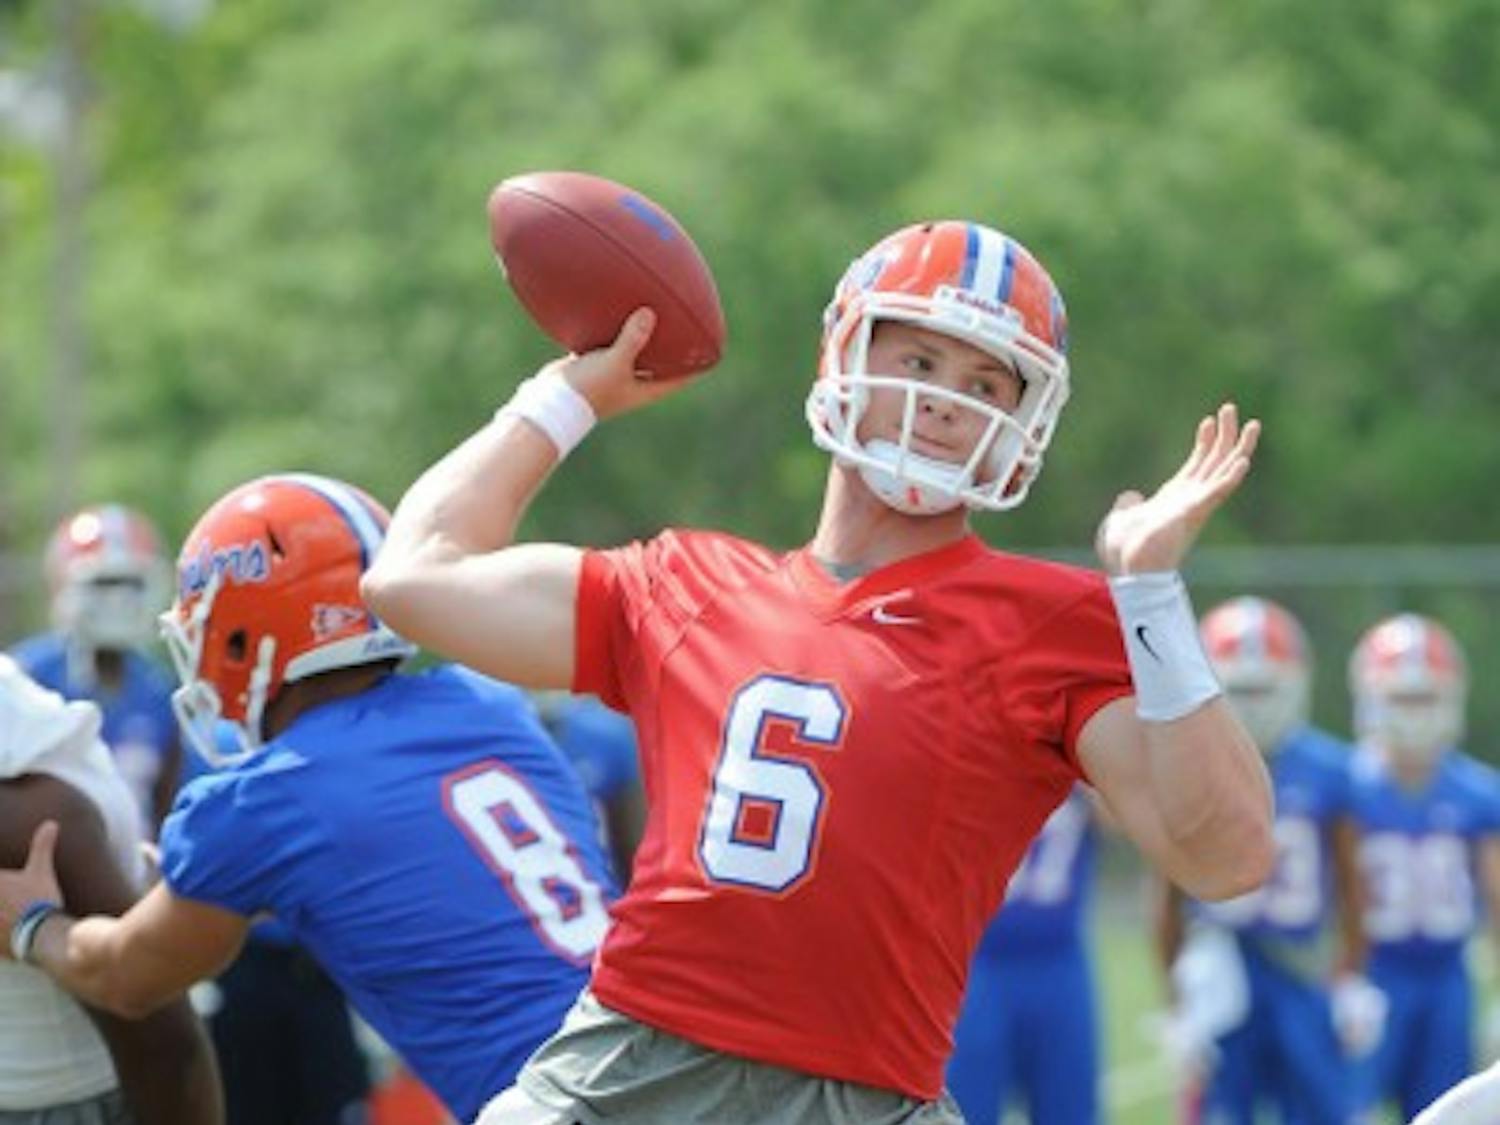 Sophomore quarterbacks Jeff Driskel (pictured) and Jacoby Brissett spoke to the media Thursday for the first time since enrolling at UF. The two are splitting reps in practice in what’s being called an open competition for the starting role.